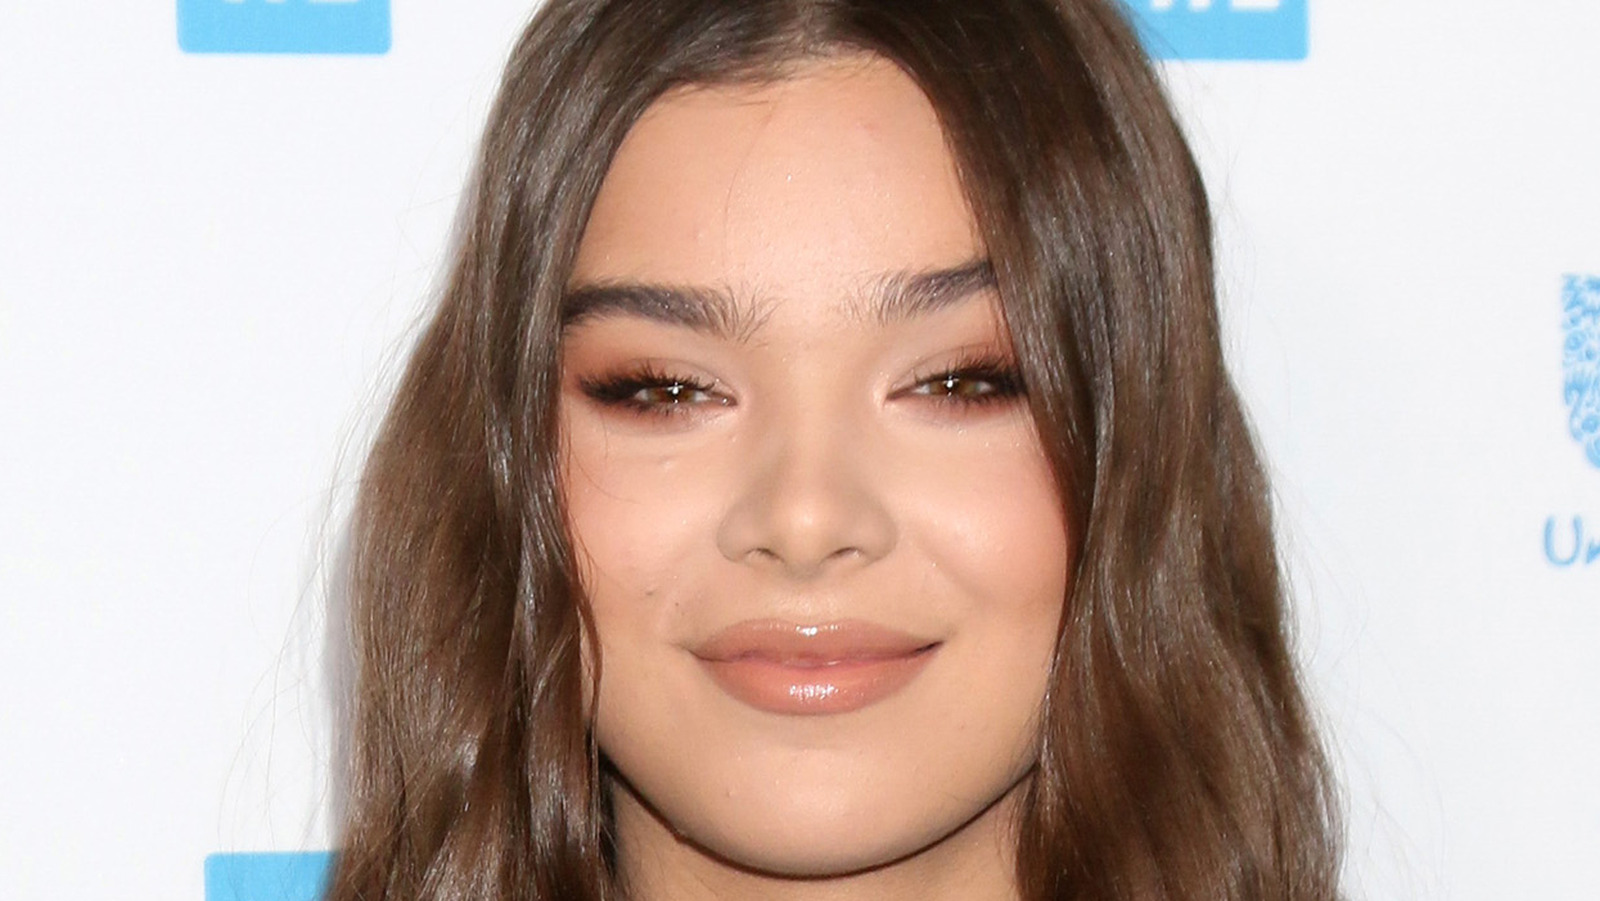 What Is Hailee Steinfeld's Nationality?